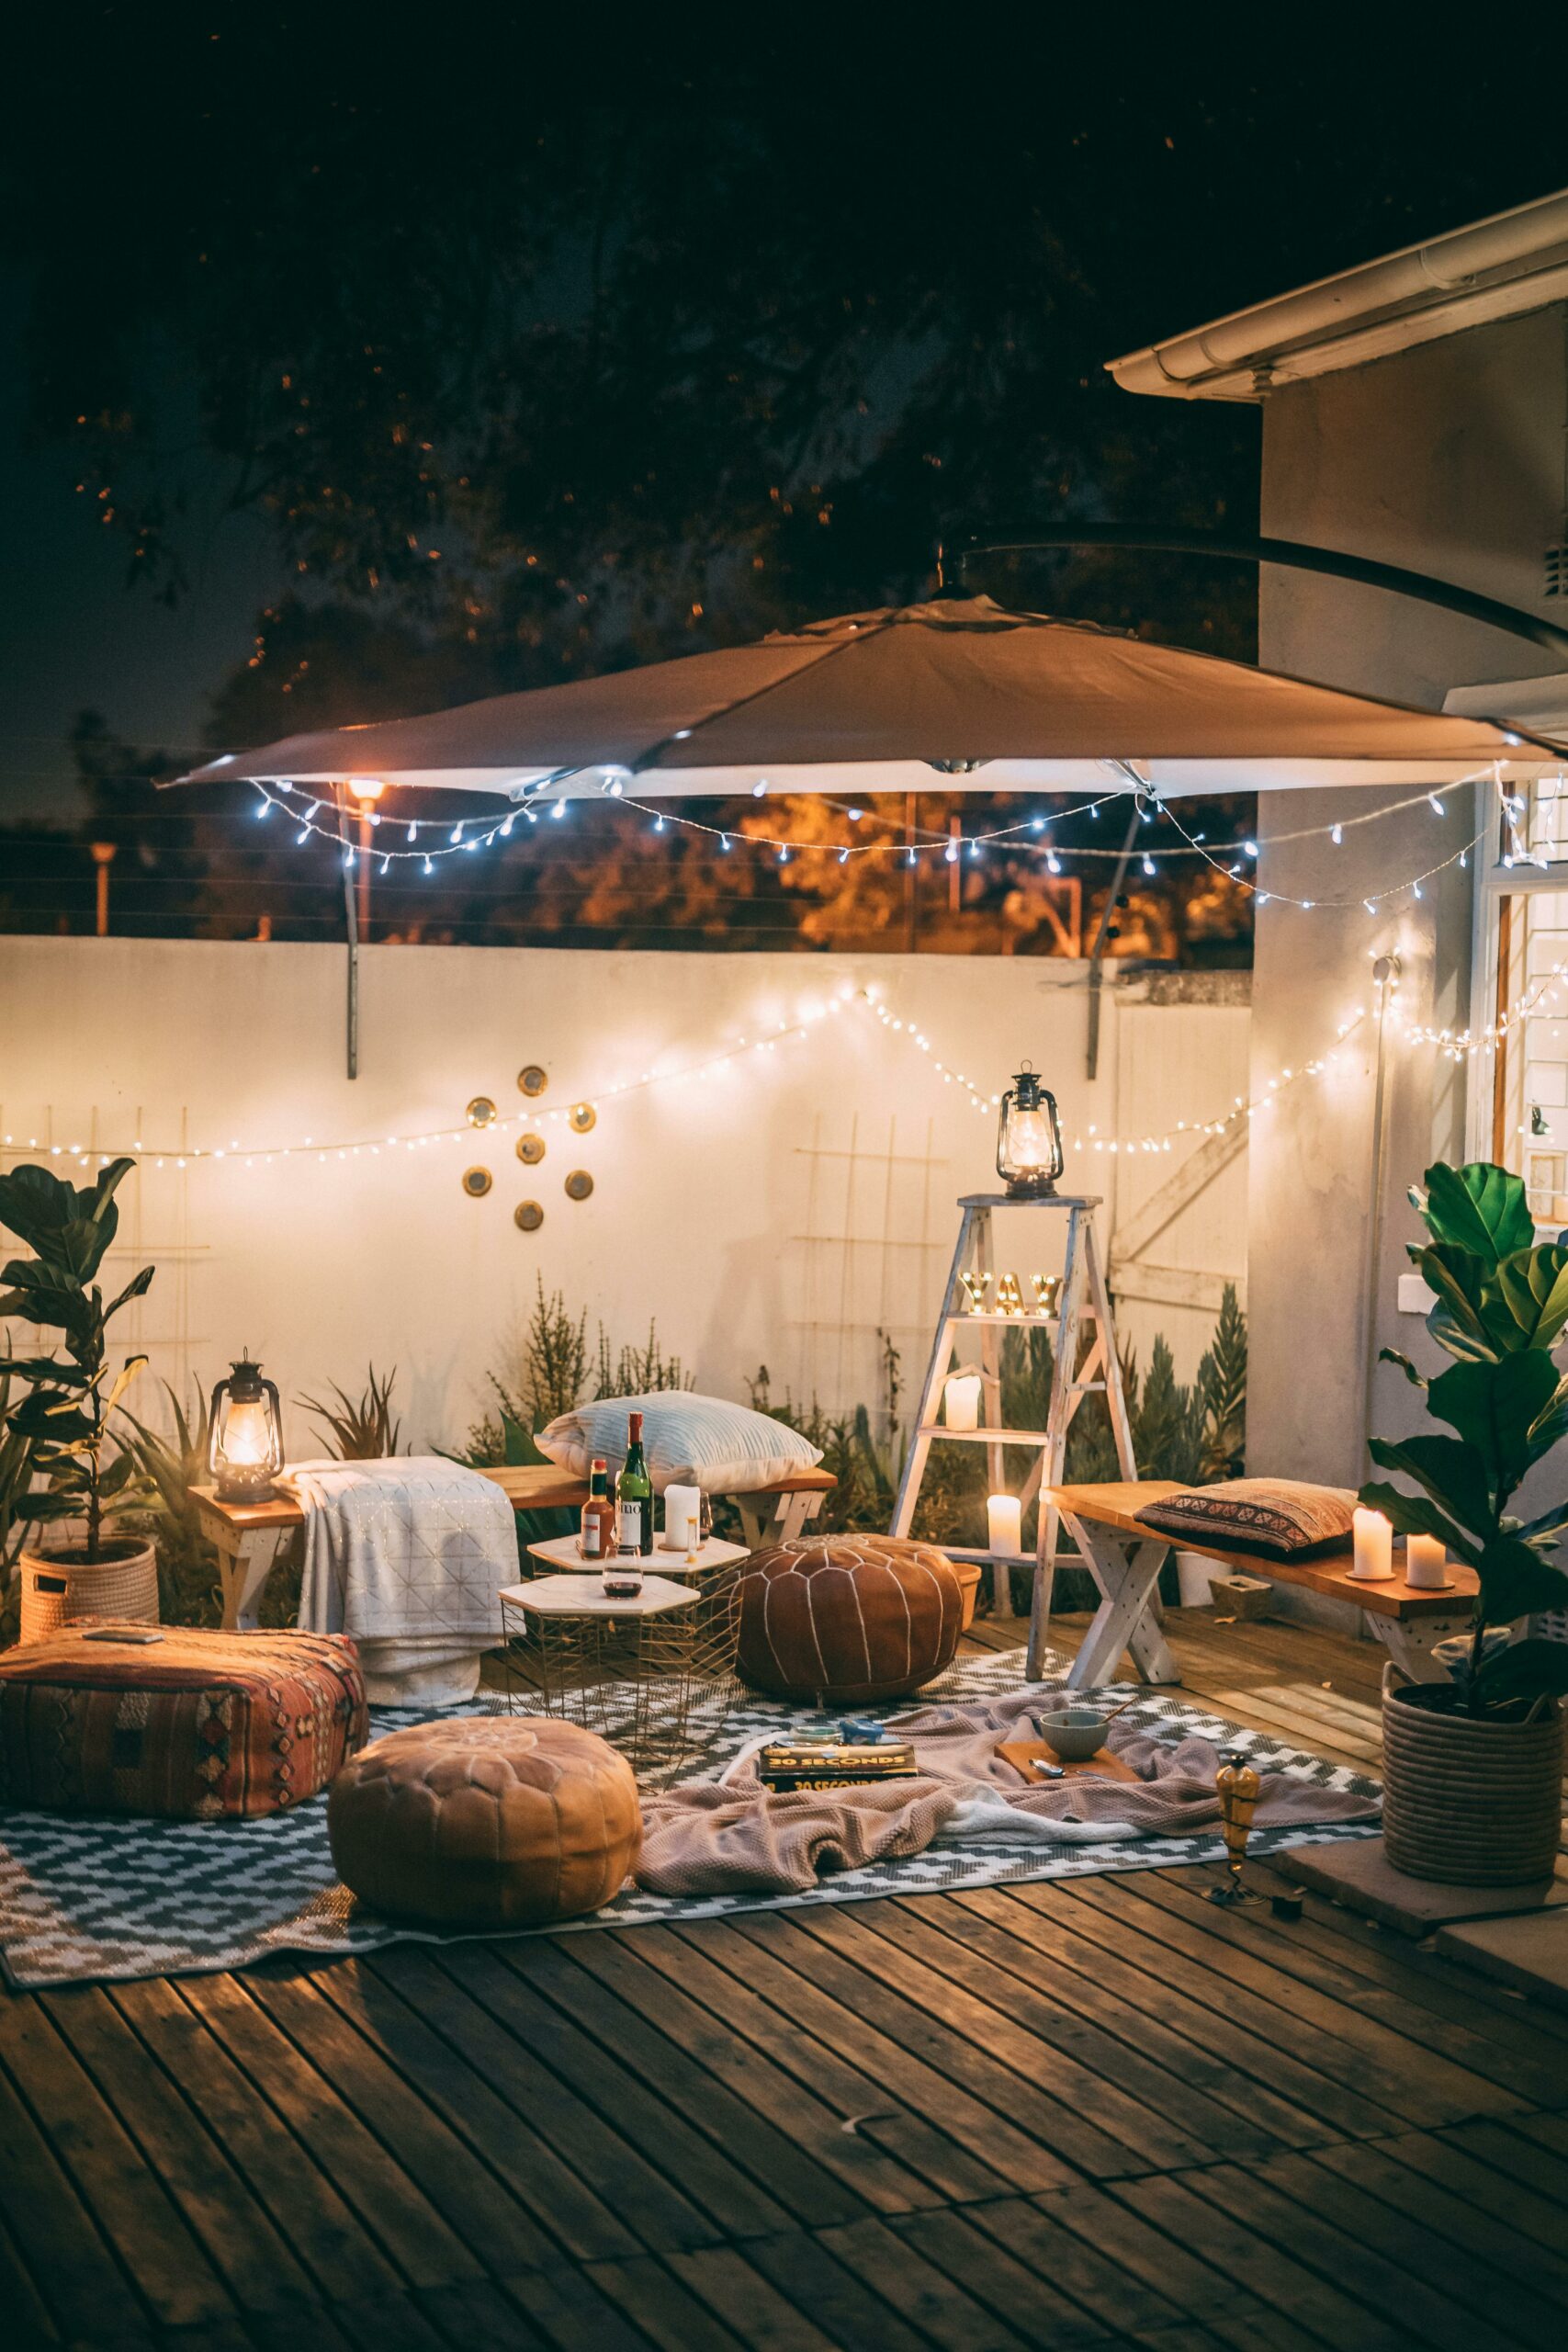 Tips for Adding Sparkle and Charm to Your Outdoor Space